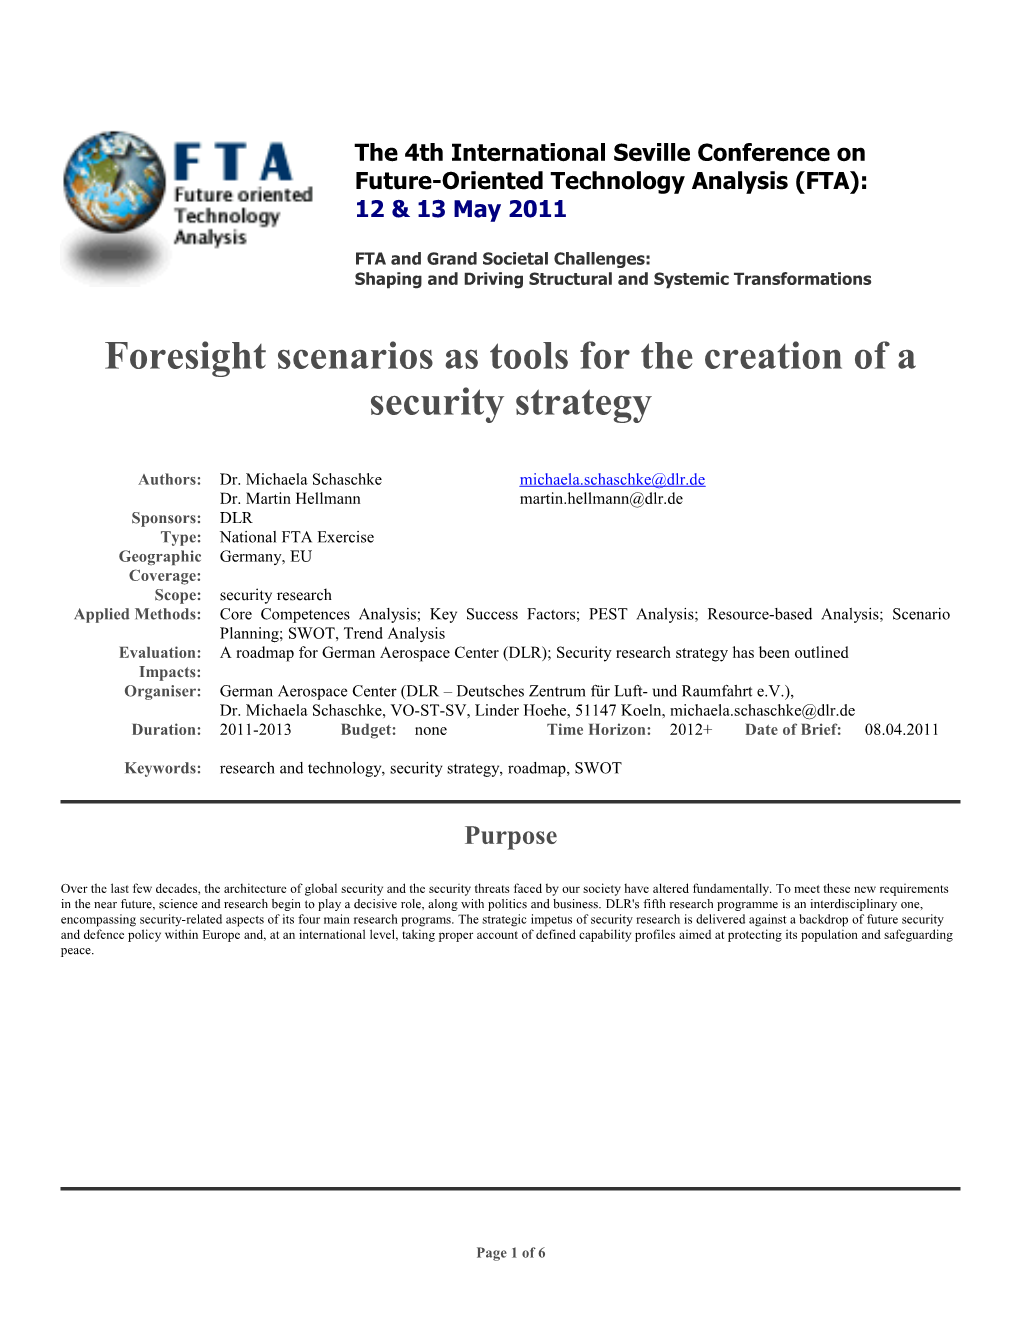 Foresight Scenarios As Tools for the Creation of a Security Strategy